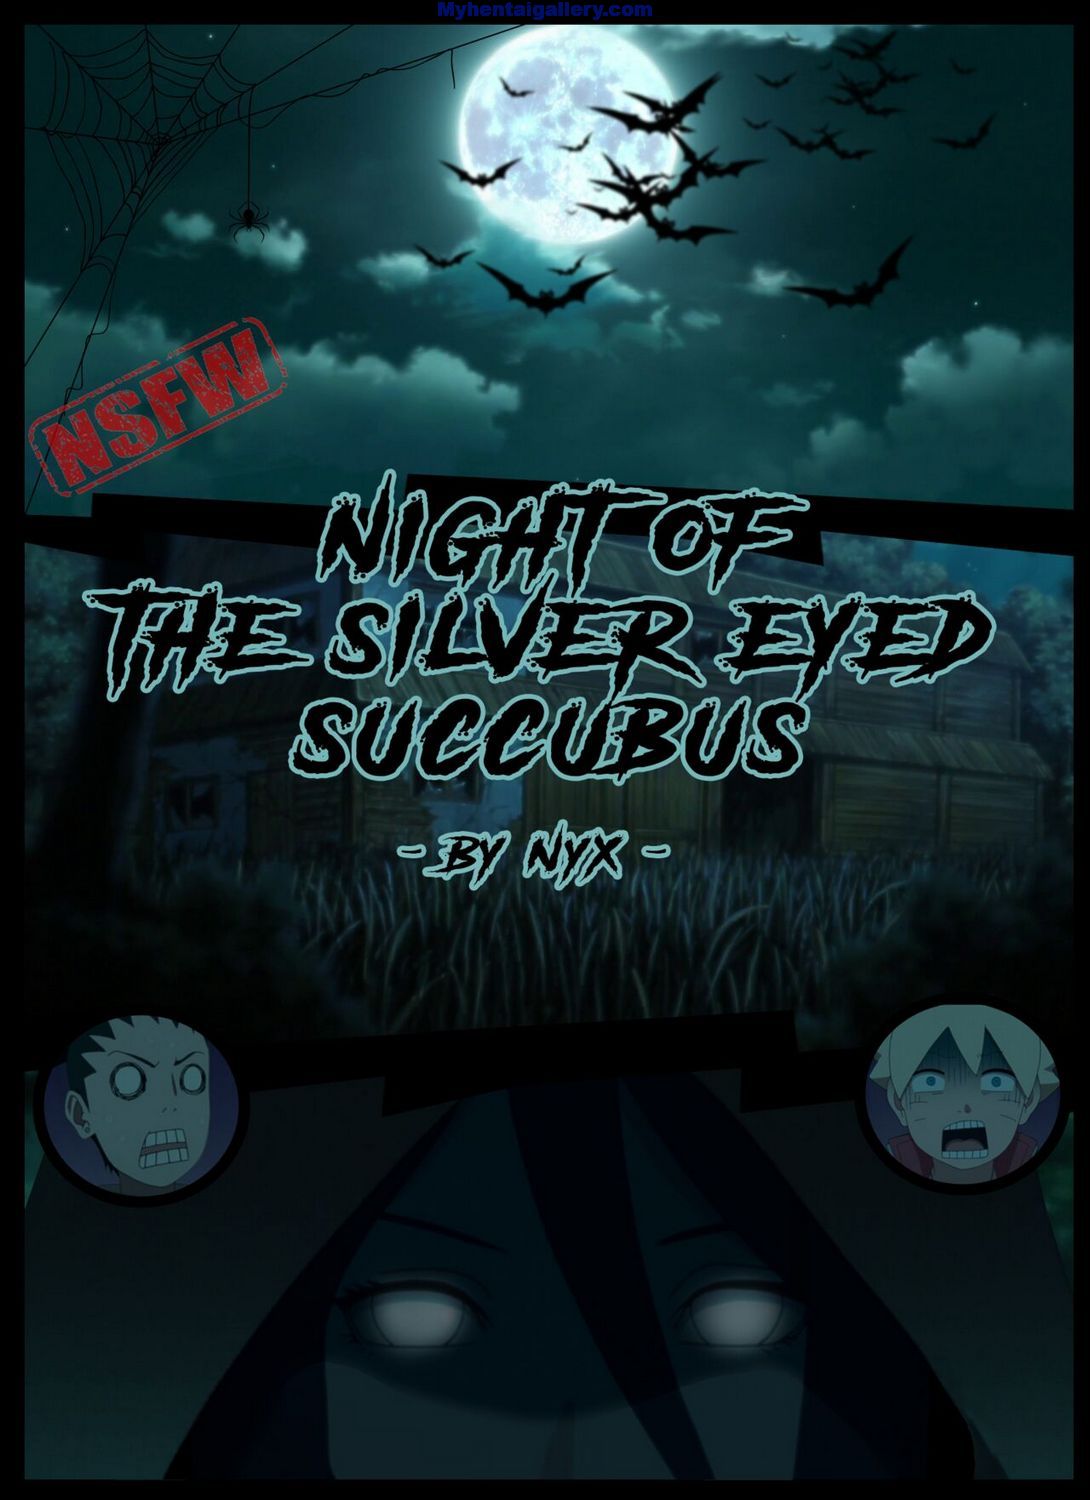 Night Of The Silver Eyed Succubus